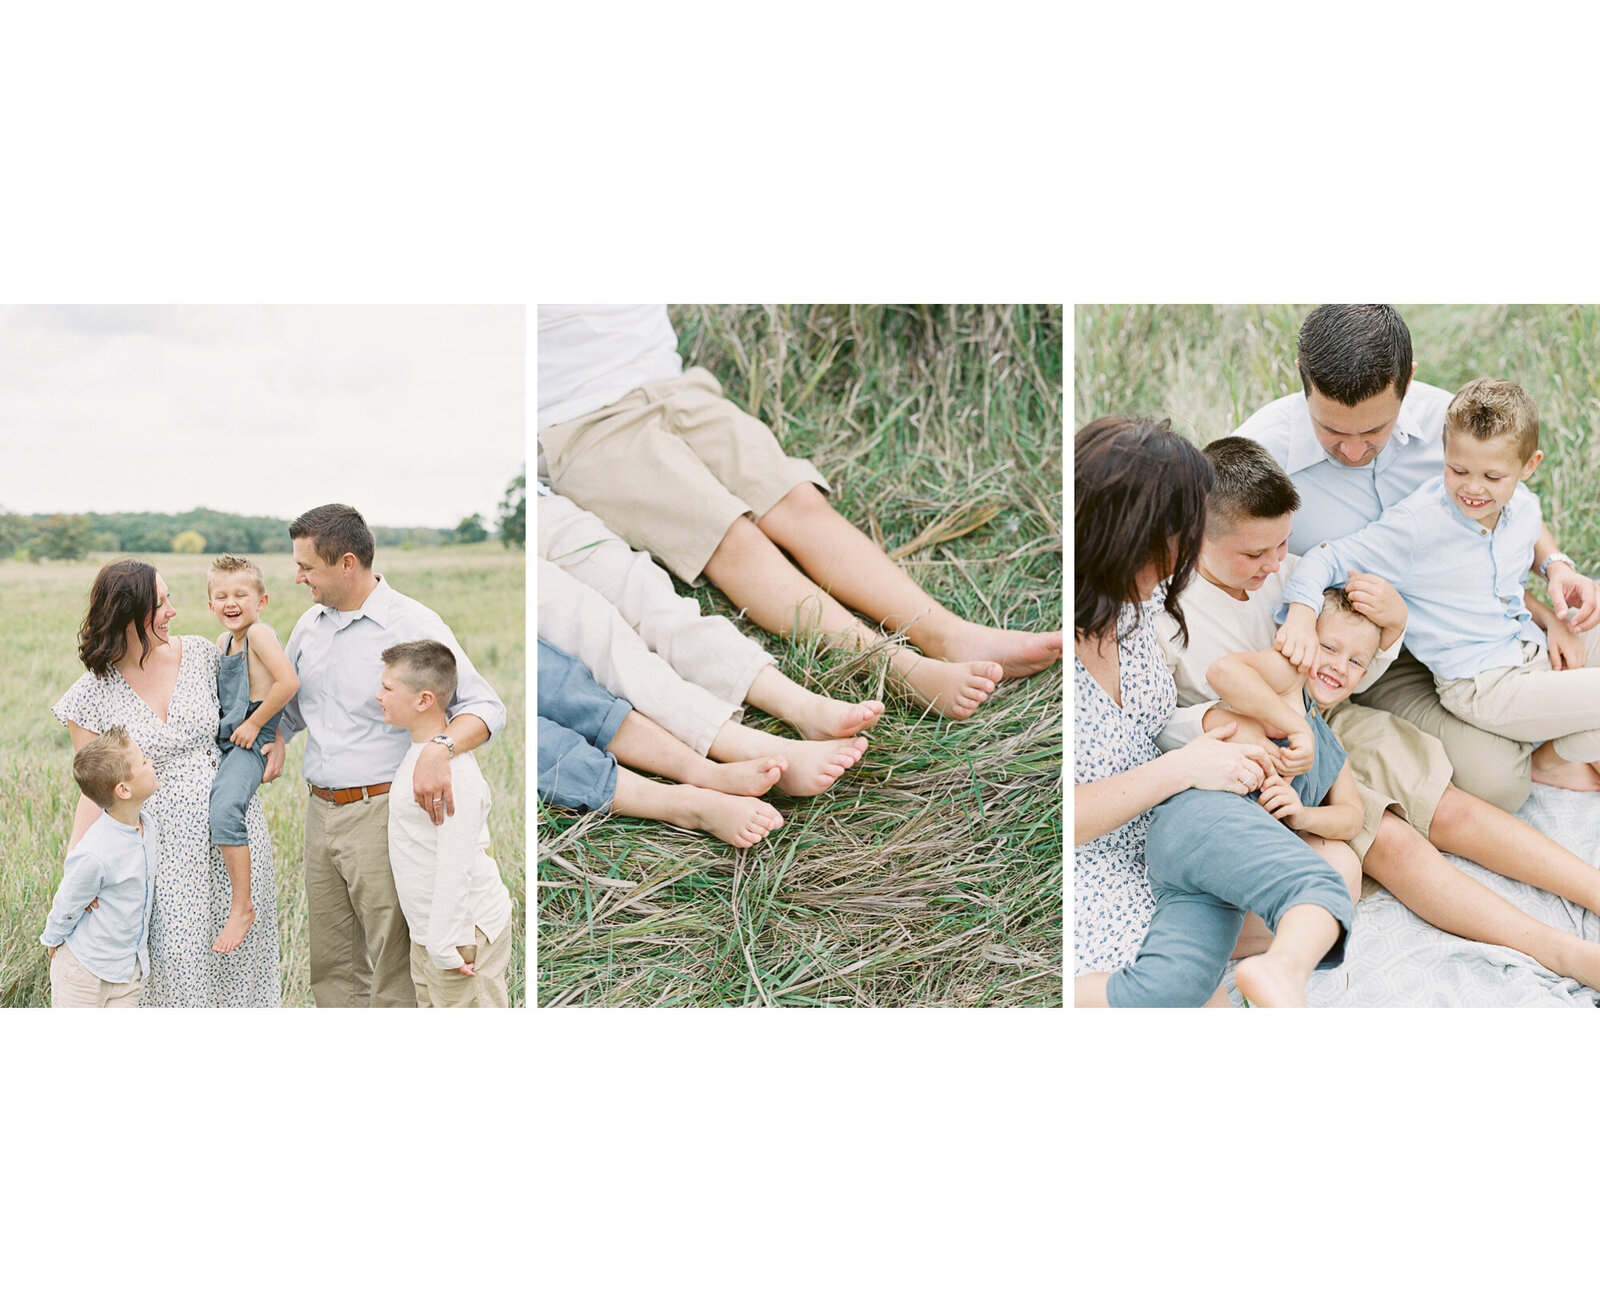 family in high end clothing during summer family session in a grassy field by Milwaukee photographer, Talia Laird Photography